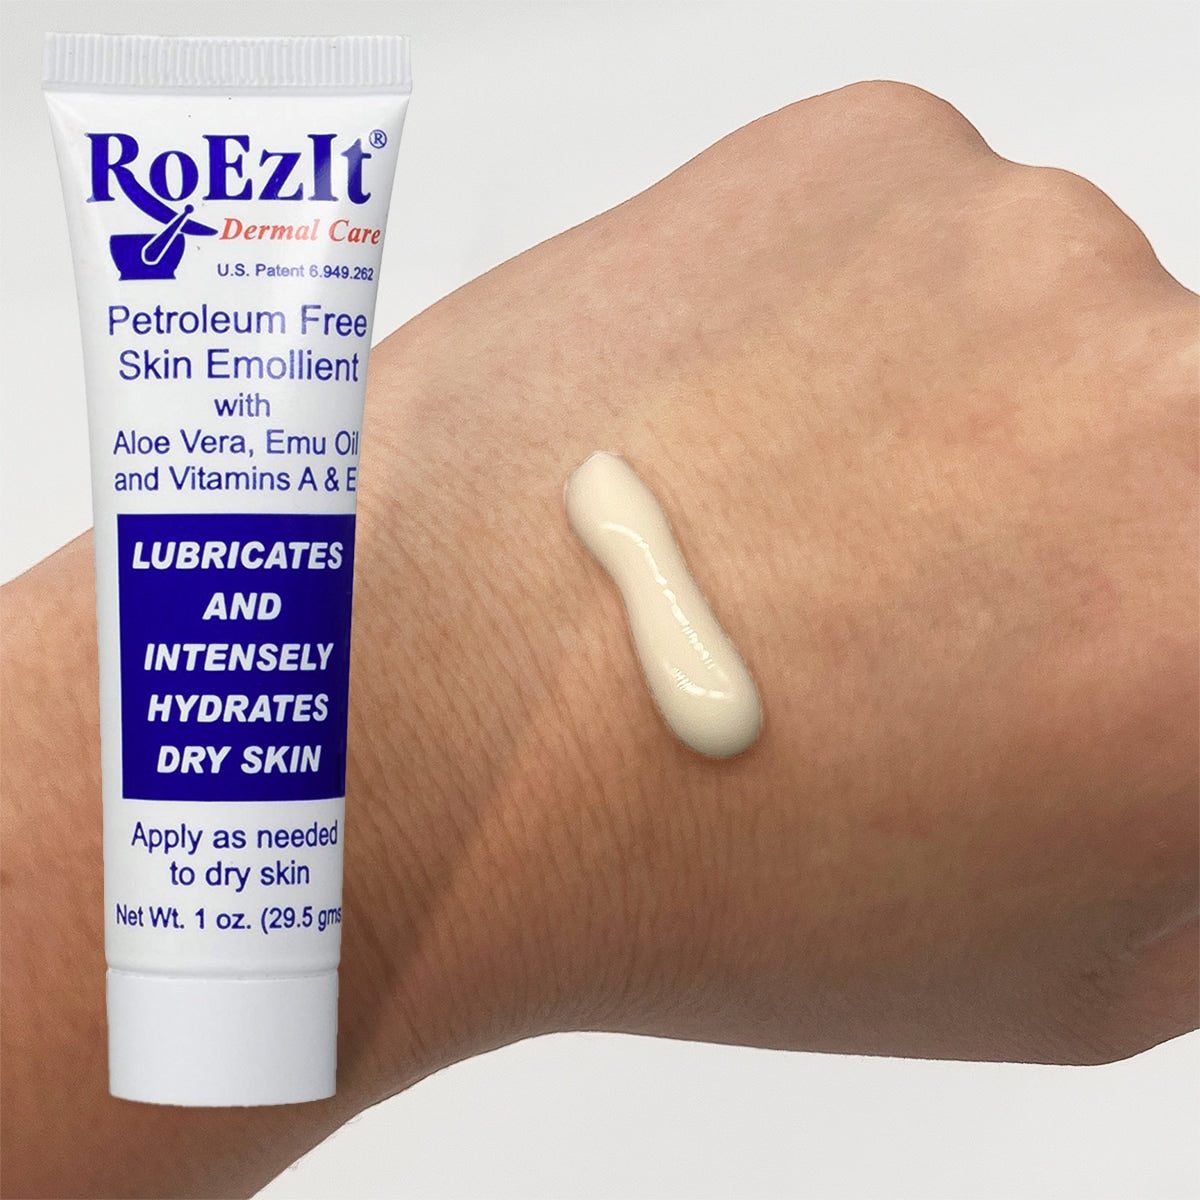 RoEzIt Dermal Care Petroleum Free Skin Emollient for CPAP & Oxygen Therapy (1 Oz Tube)